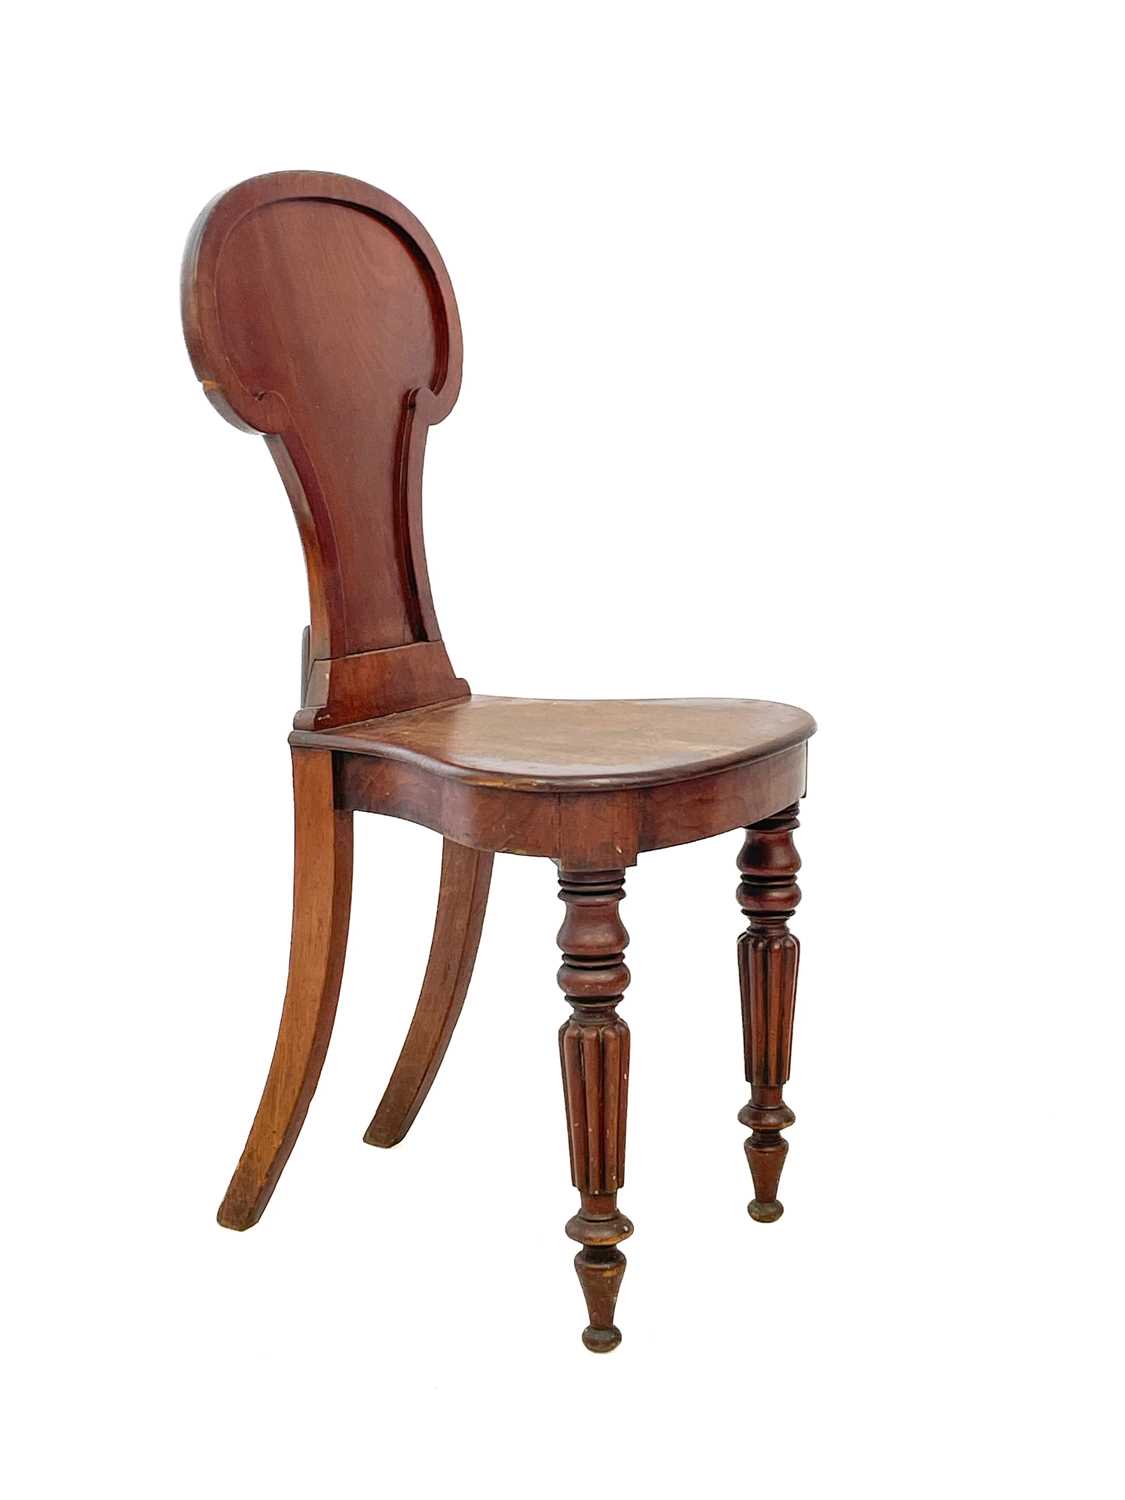 A late Victorian walnut swivel chair, on a cast iron base. - Image 2 of 6